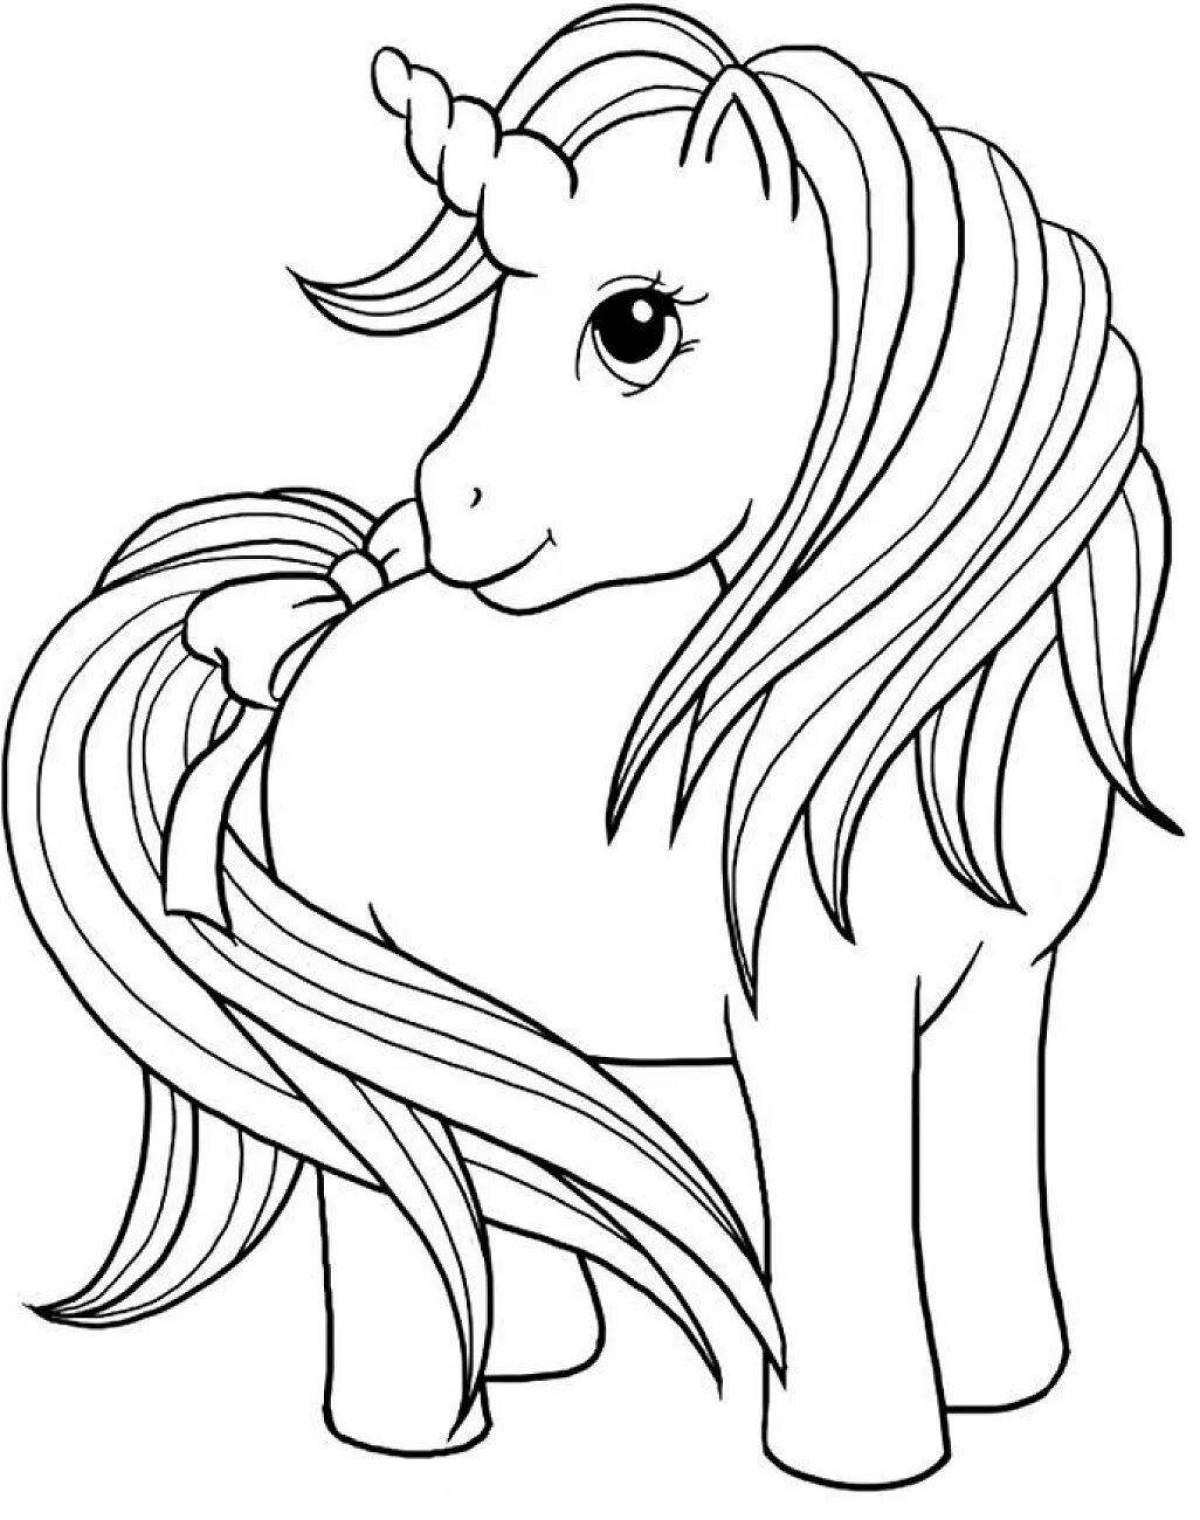 Glowing unicorn coloring page